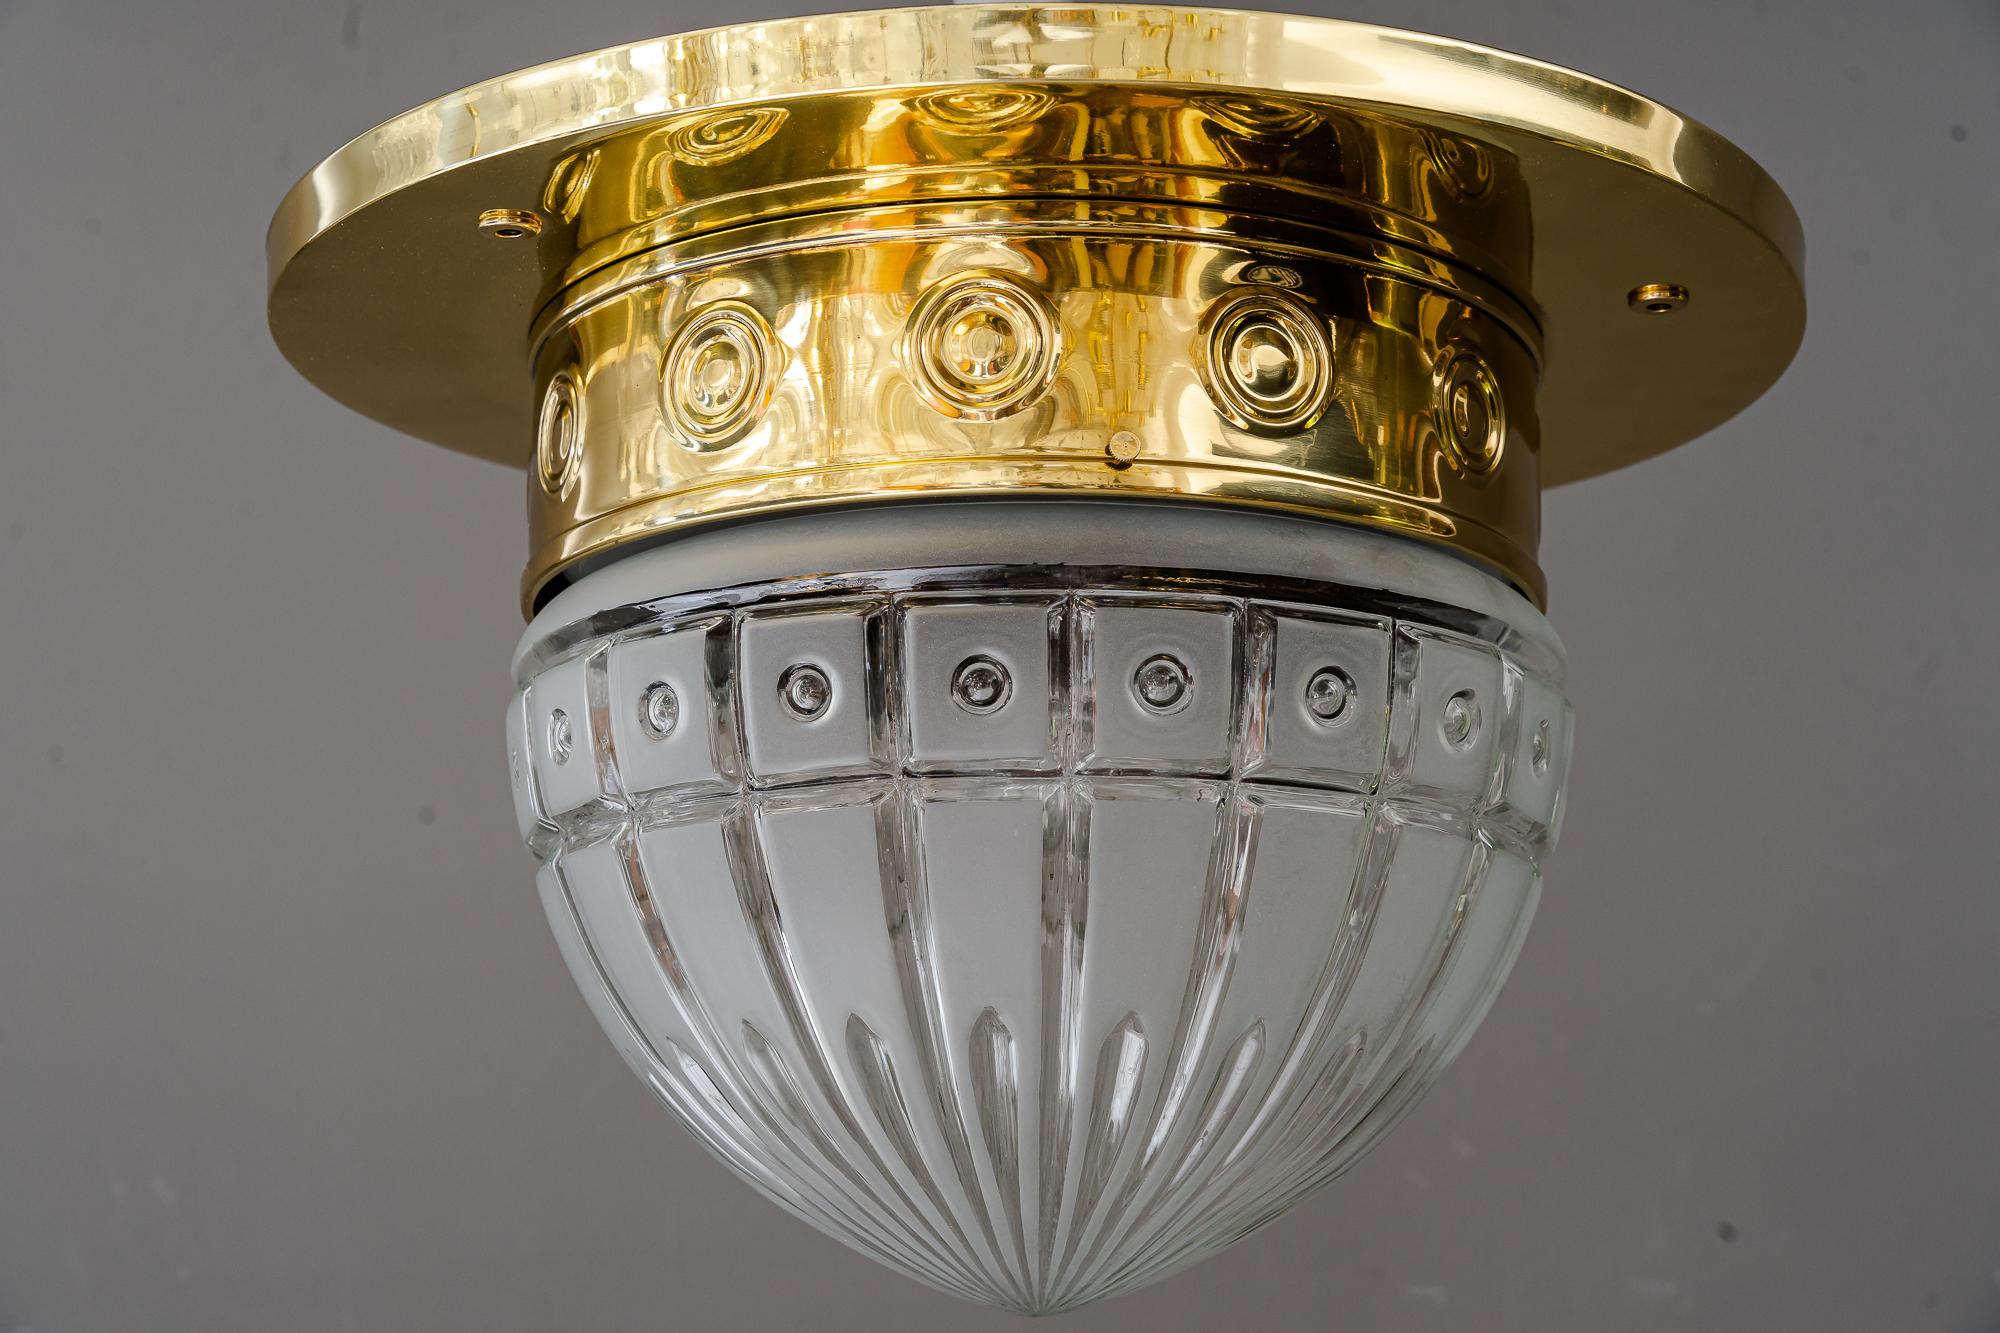 Big Art Deco ceiling lamp vienna around 1920s.
Brass polished and stove enameled.